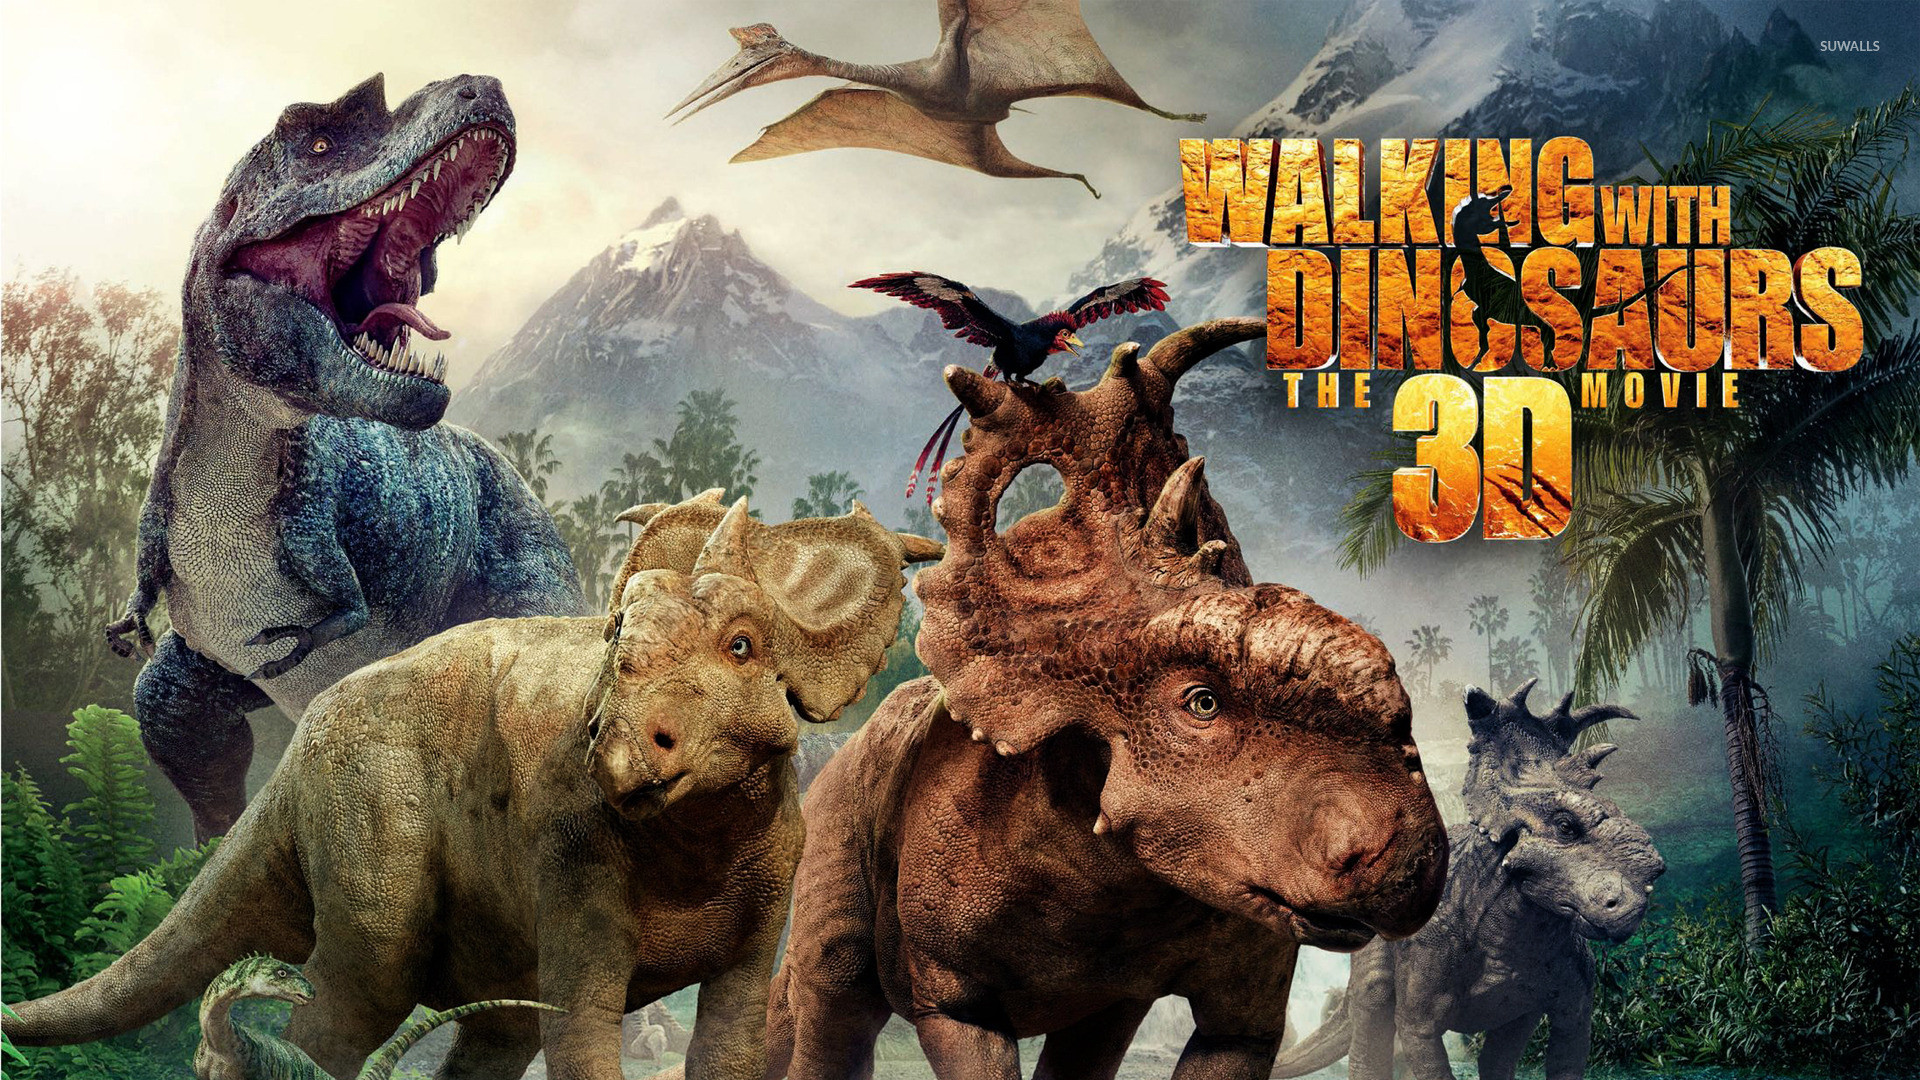 1920x1080 Walking with Dinosaurs 3D [3] wallpaper - Movie wallpapers .